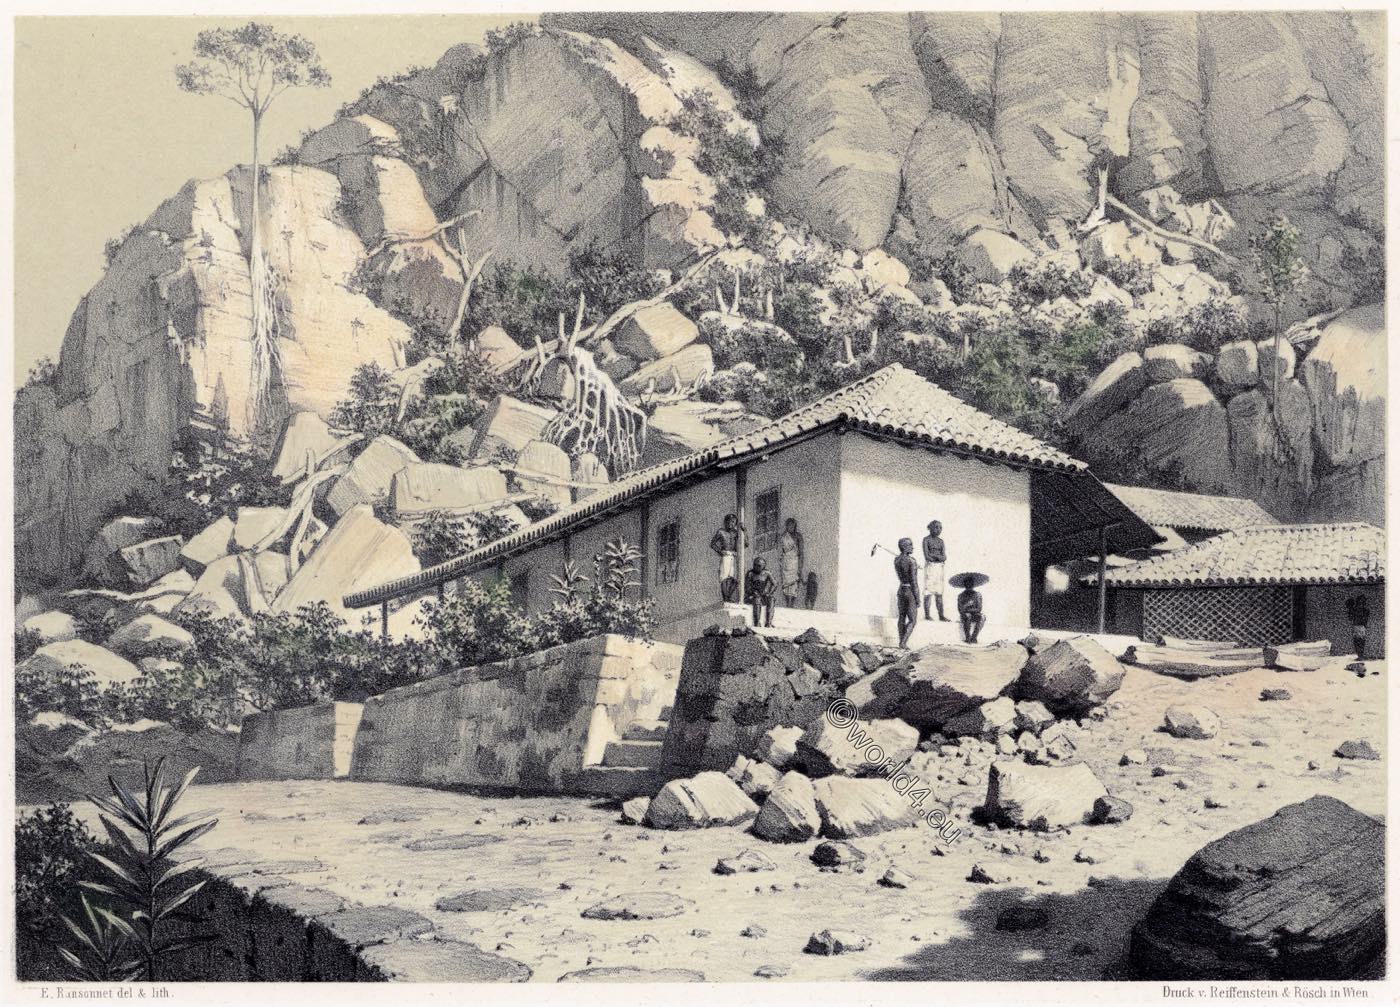 Coffee planter in Laymastotte at the foot of bold crags. Sri Lanka 19th c..